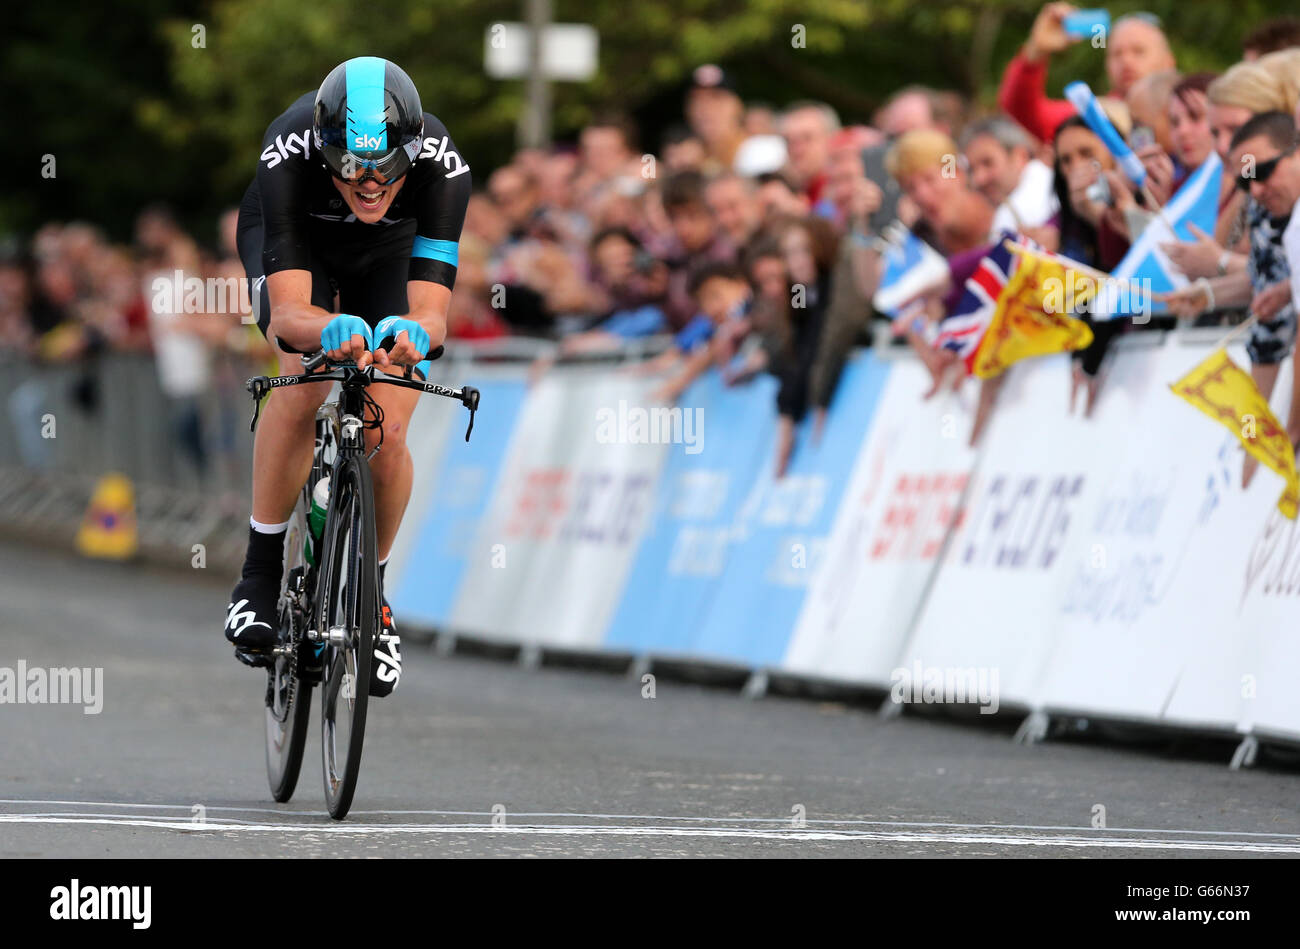 Ciclismo - National Road Race Championships - Day One - Glasgow. Ben Swift durante il Mens Time Trial durante il National Road Race Championships di Glasgow. Foto Stock